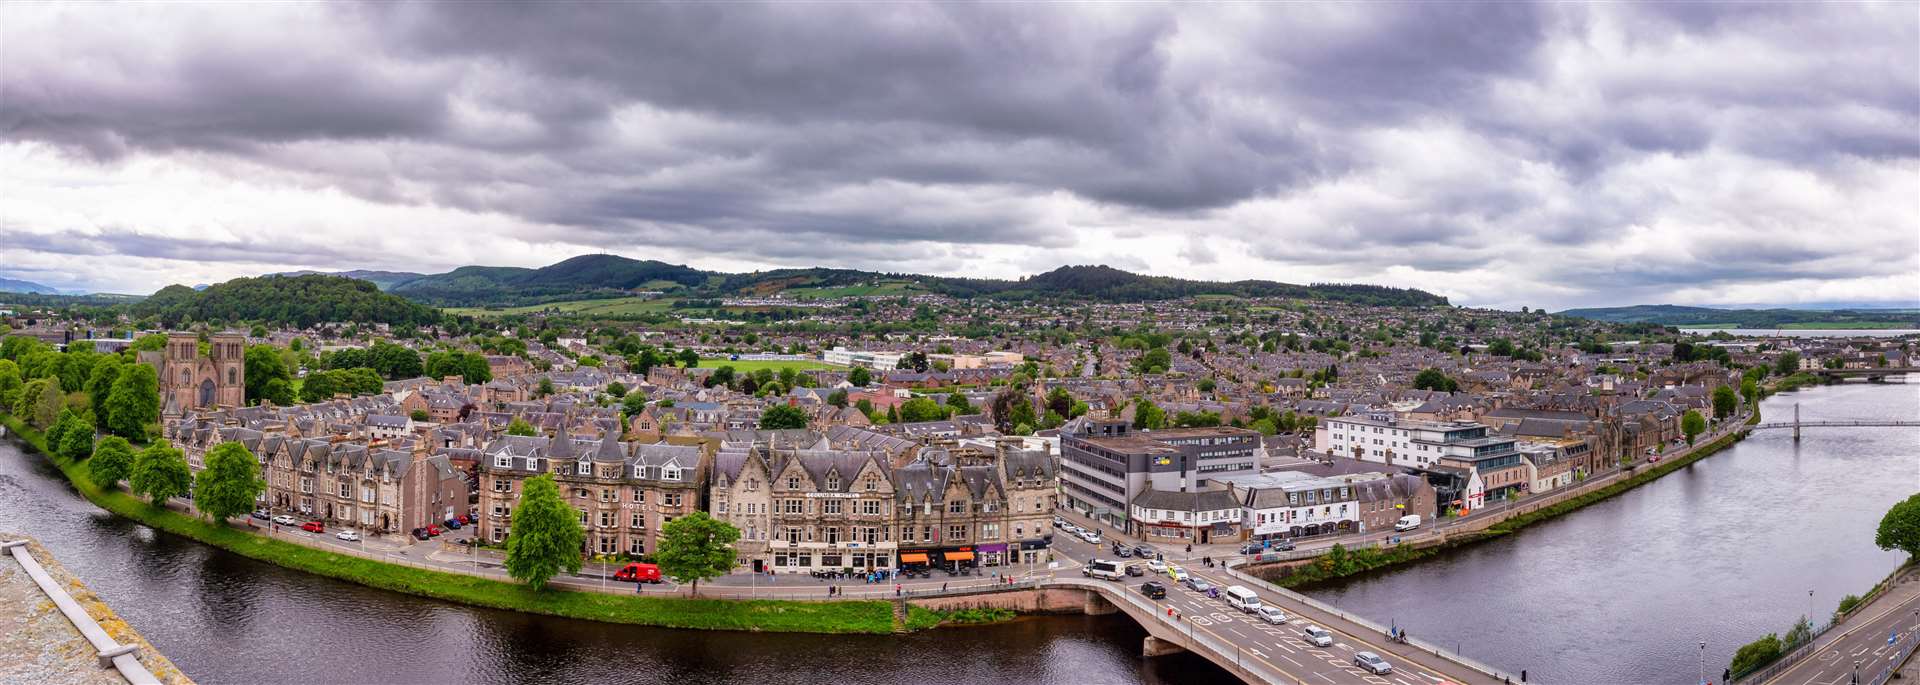 Panoram of Inverness